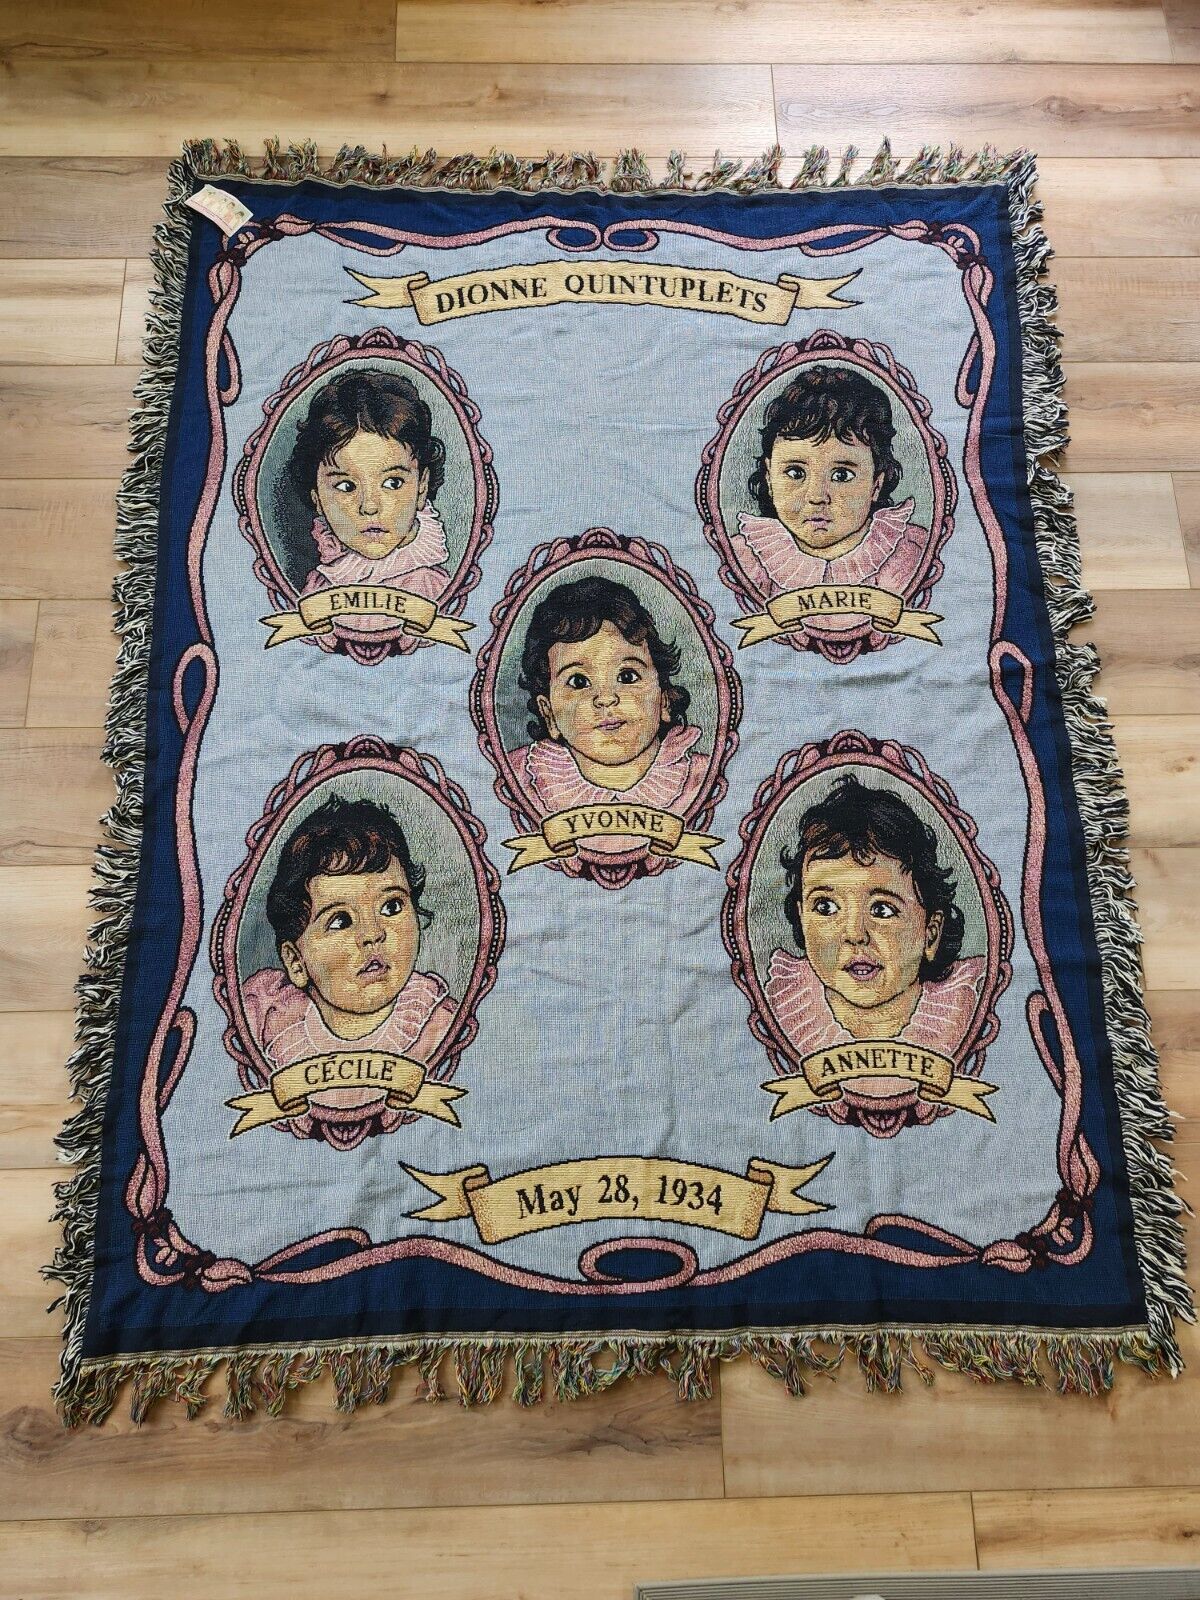 Dionne Quintuplets Woven Blanket - Pristine and Rare